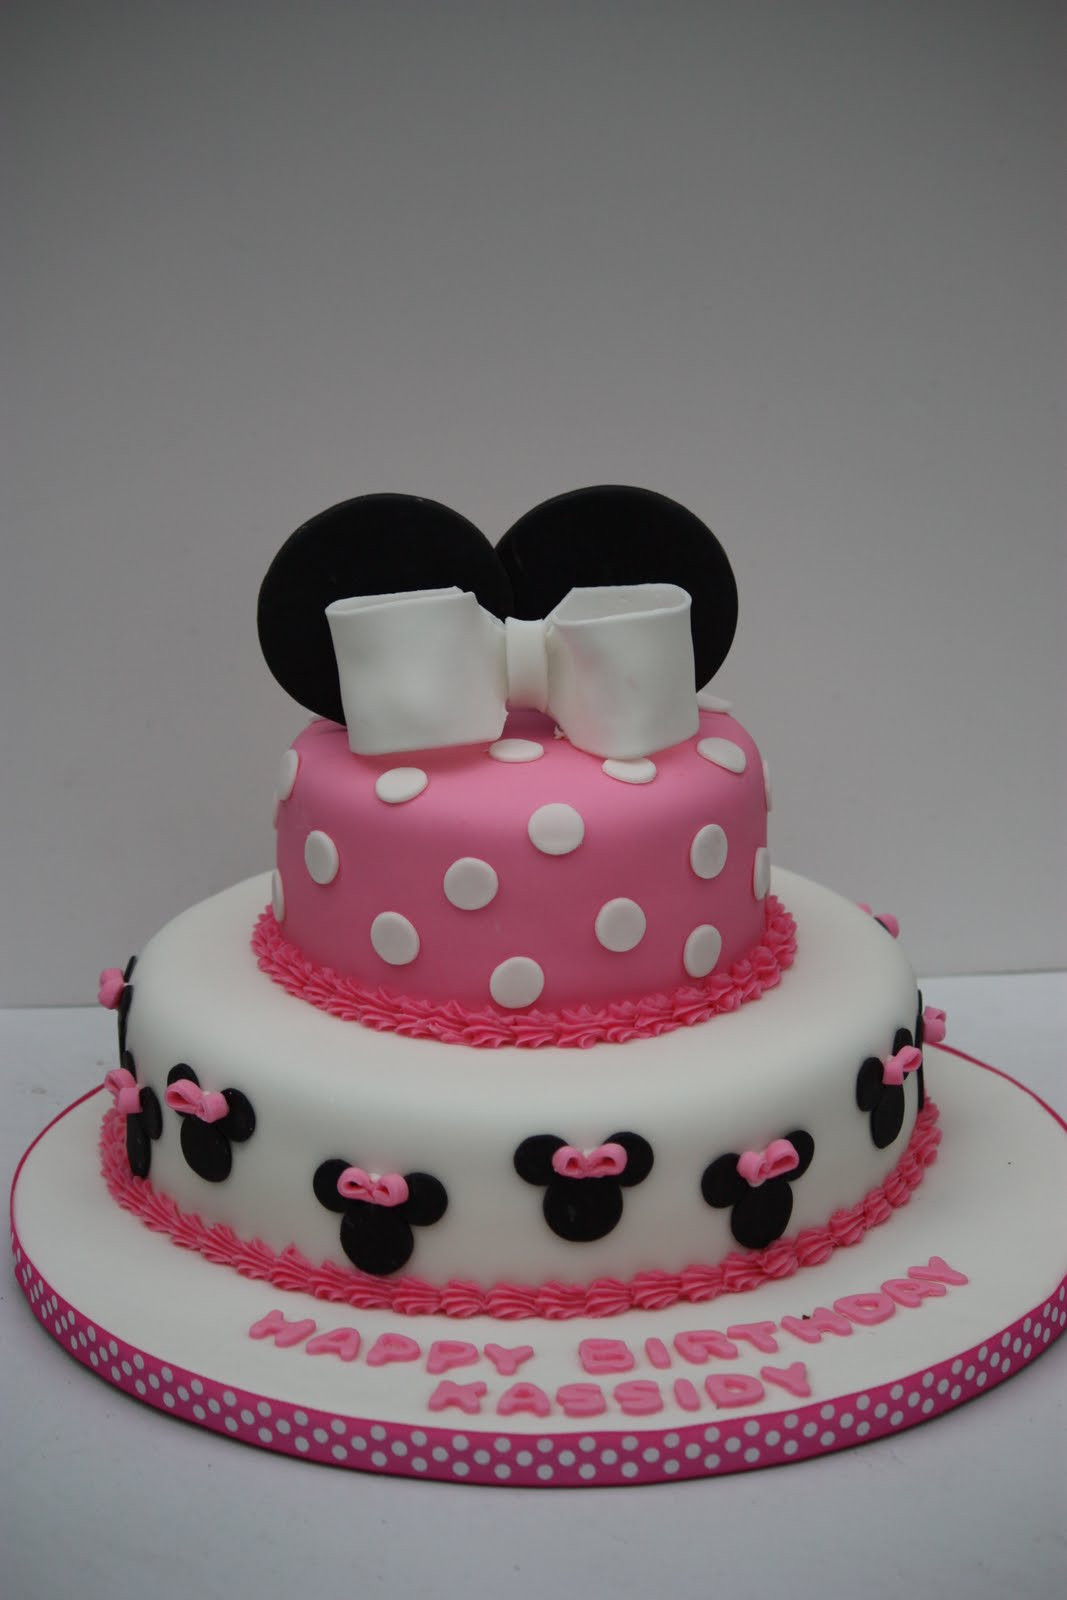 Minnie Mouse Birthday Cake Ideas
 Whimsical by Design Minnie Mouse Birthday Cake